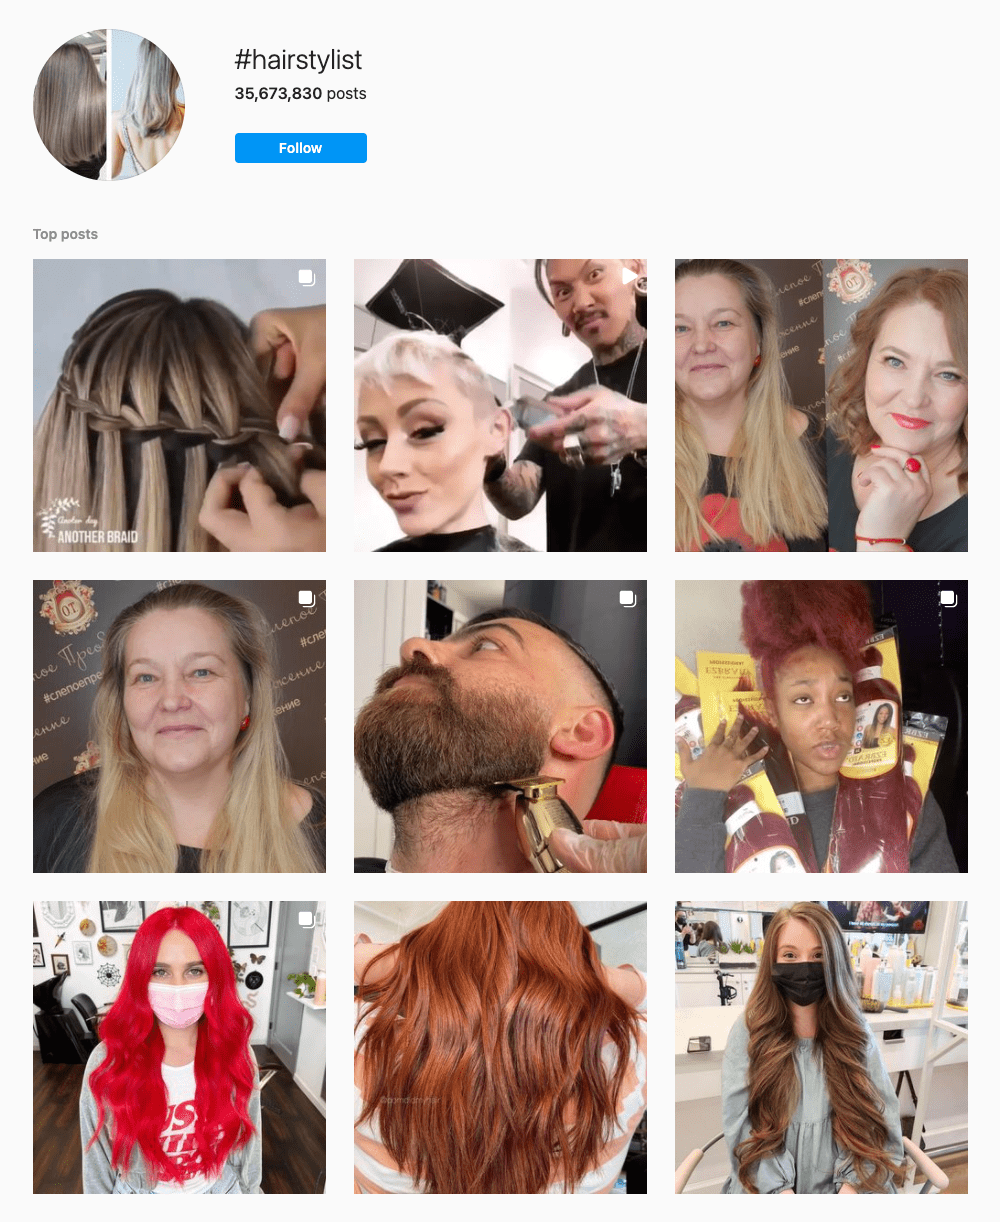 #hairstylist Hashtags for Instagram